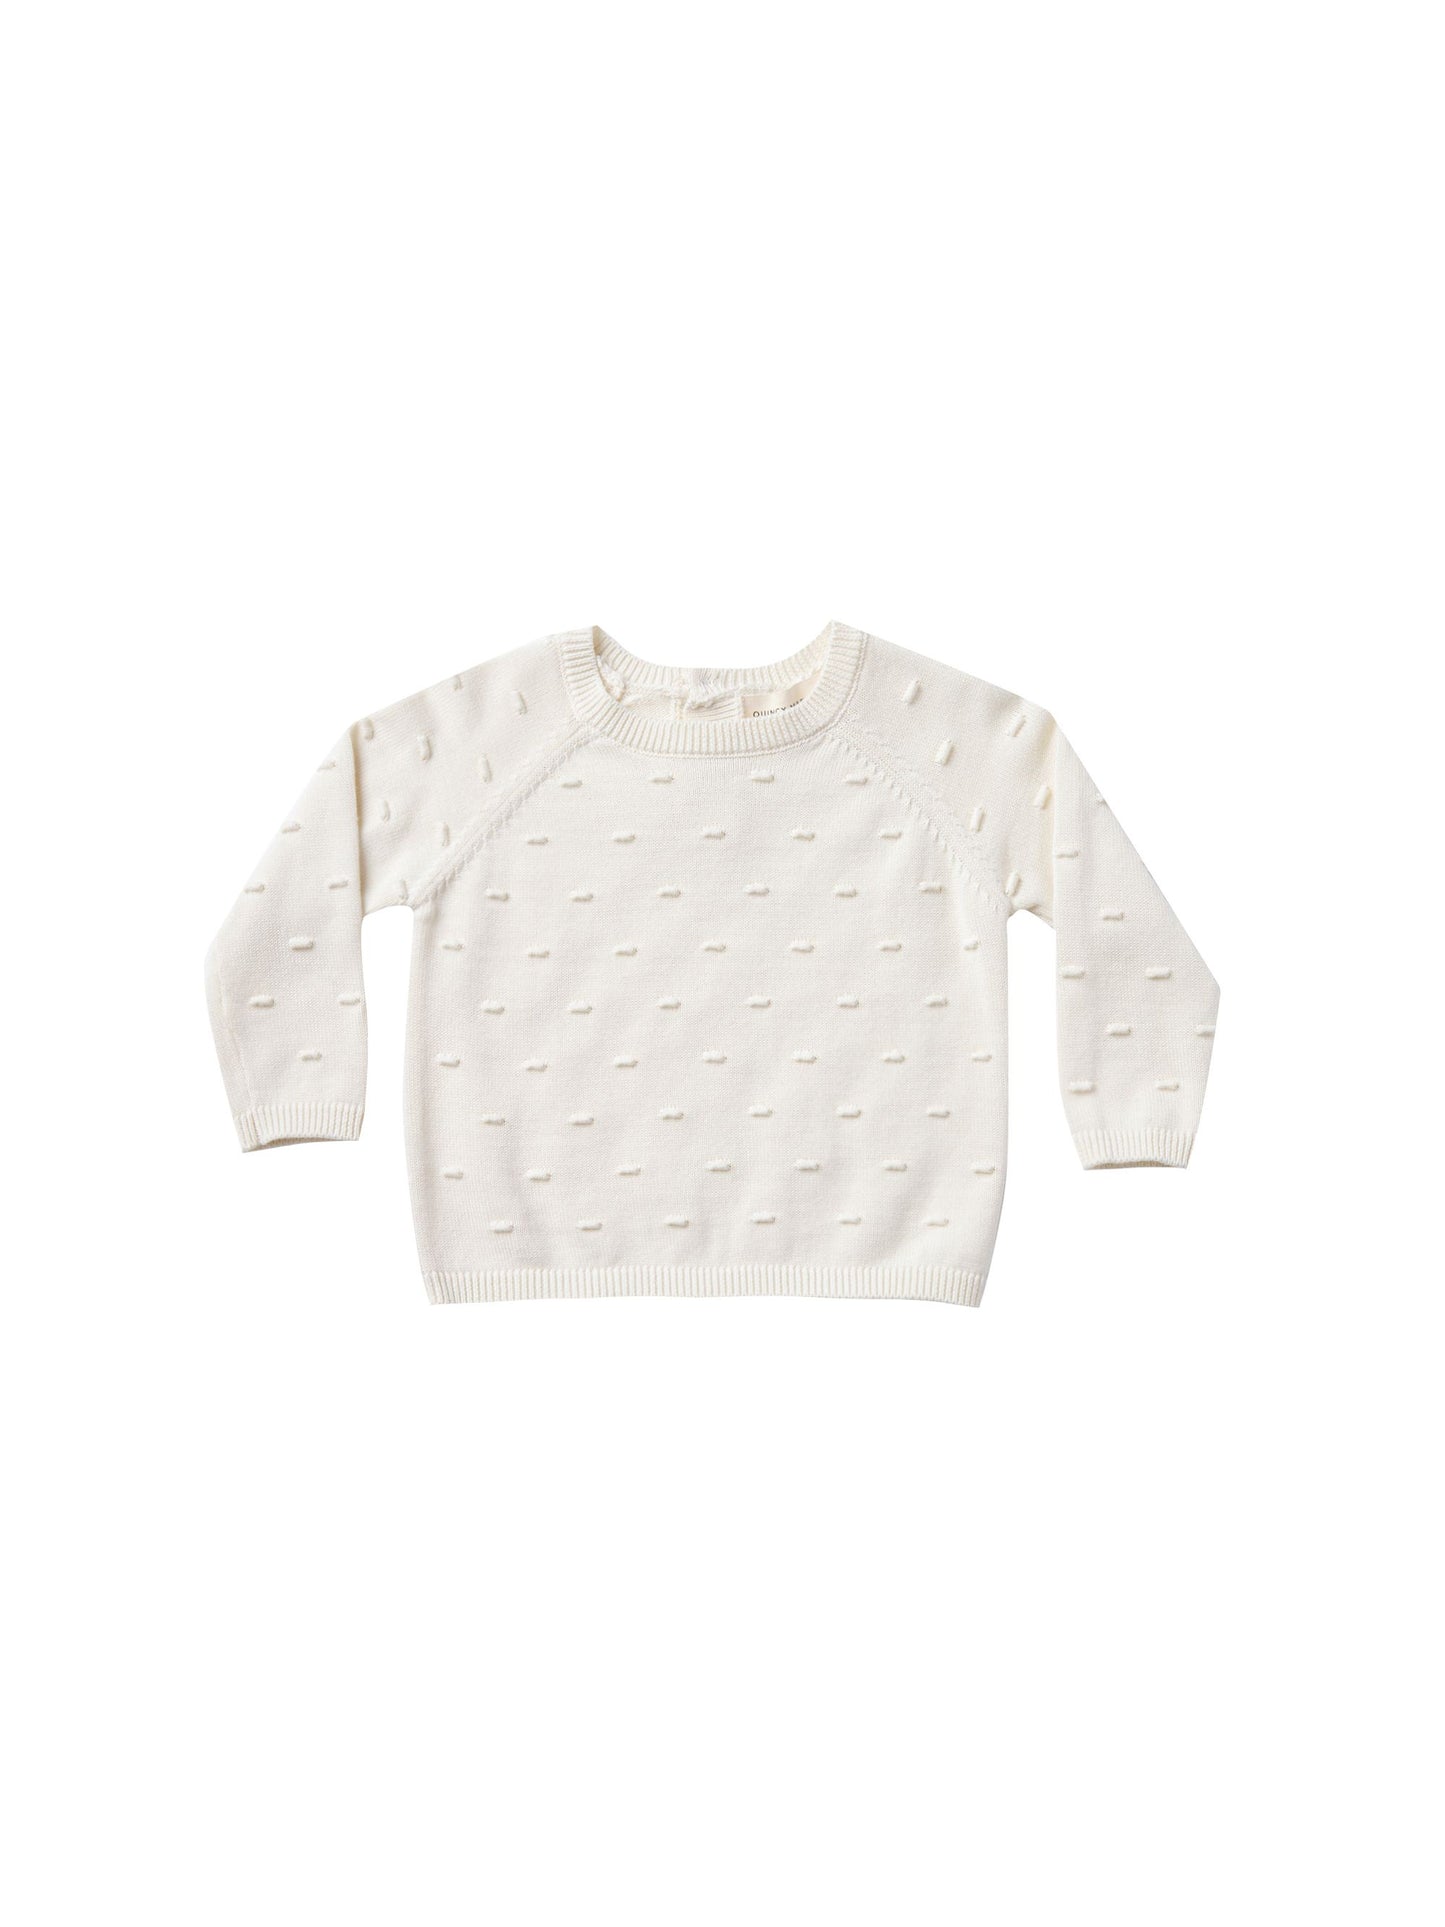 Quincy Mae - Bailey Knit Sweater Ivory